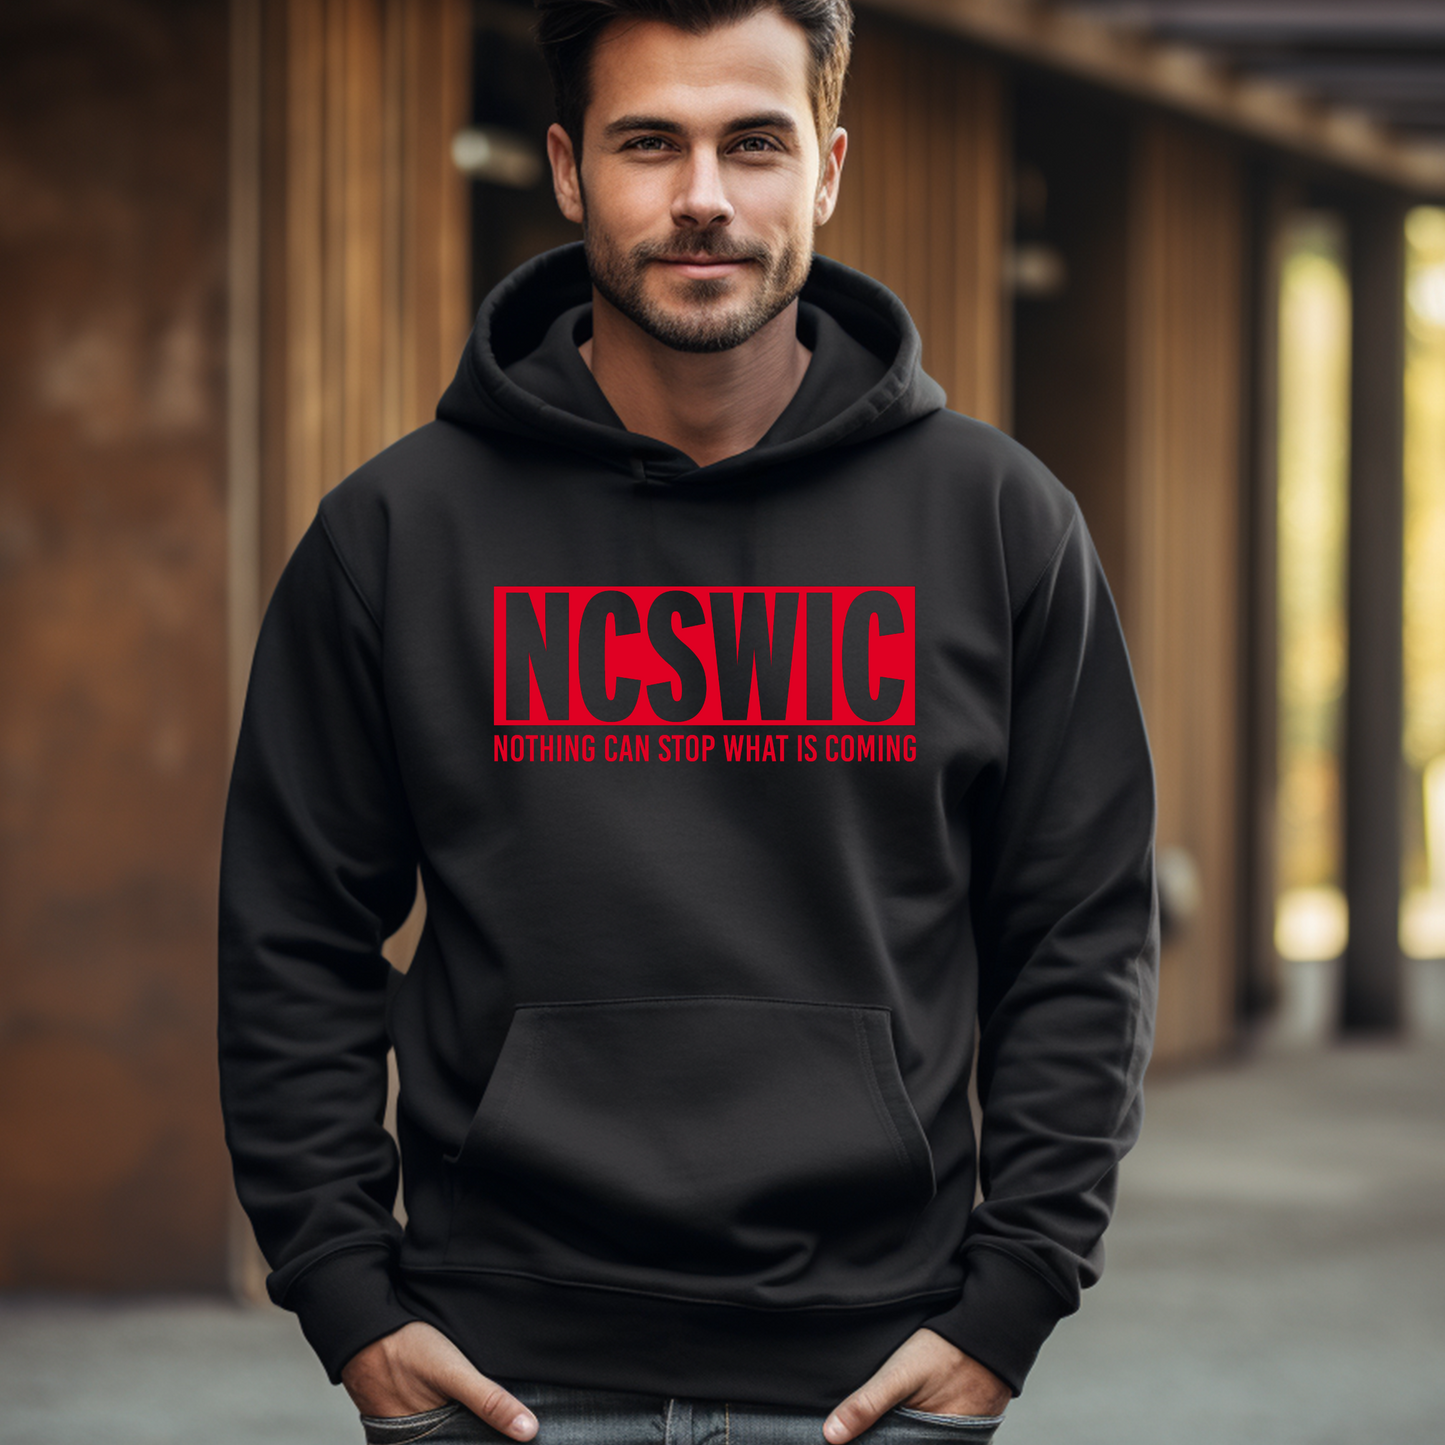 Patriot Hoodie For Conservative Hooded Sweatshirt For NCSWIC Message